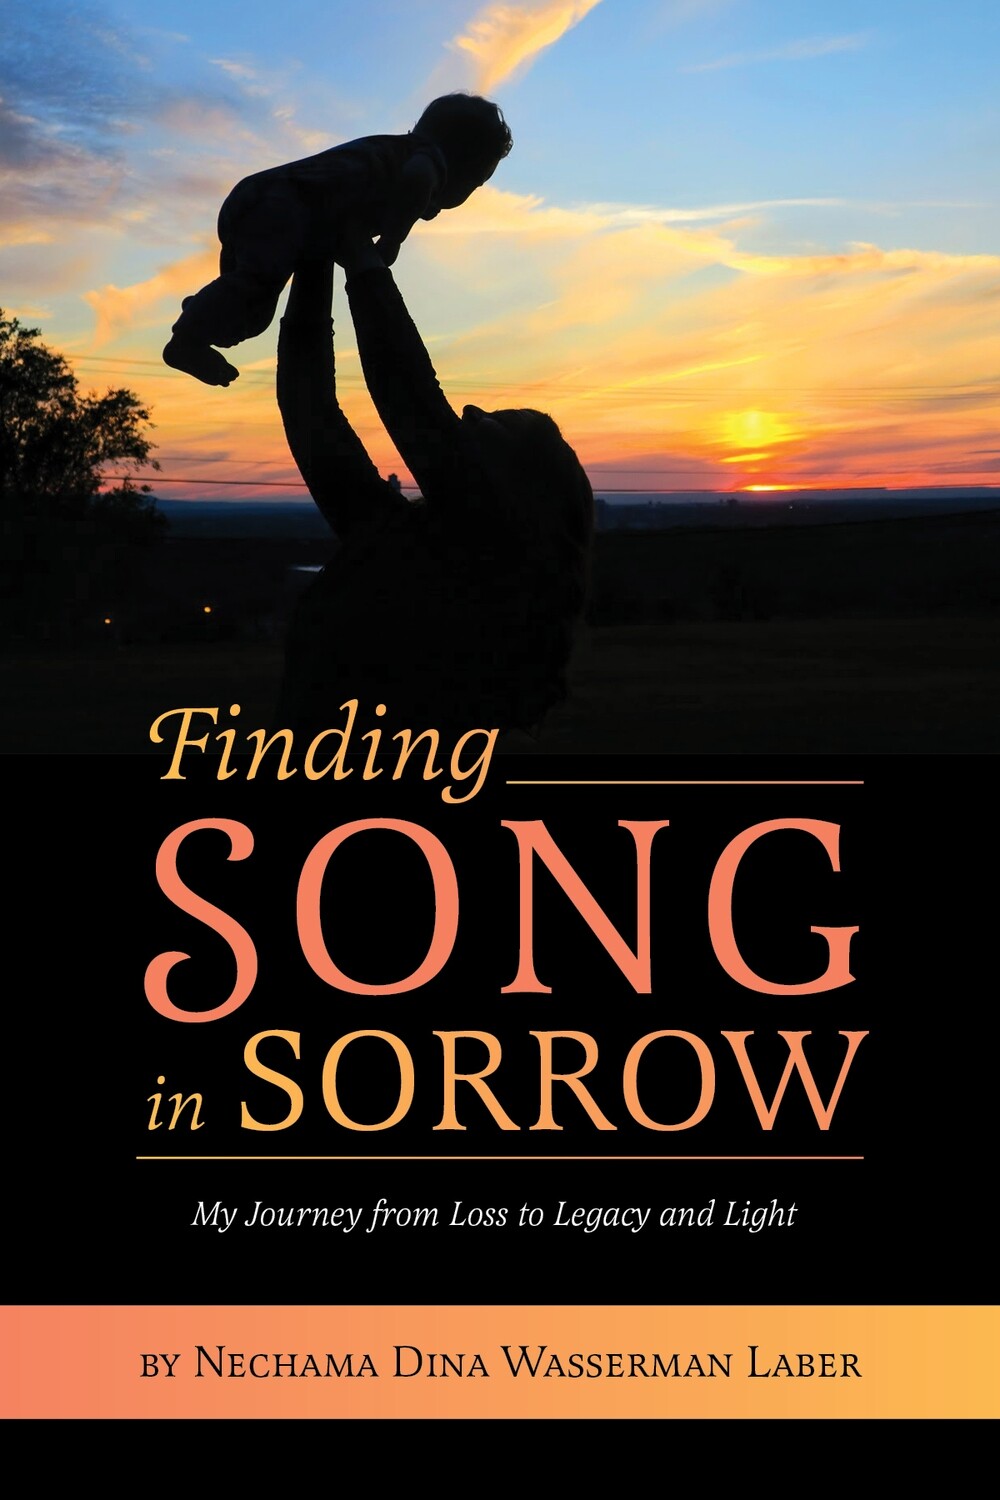 Finding Song in Sorrow